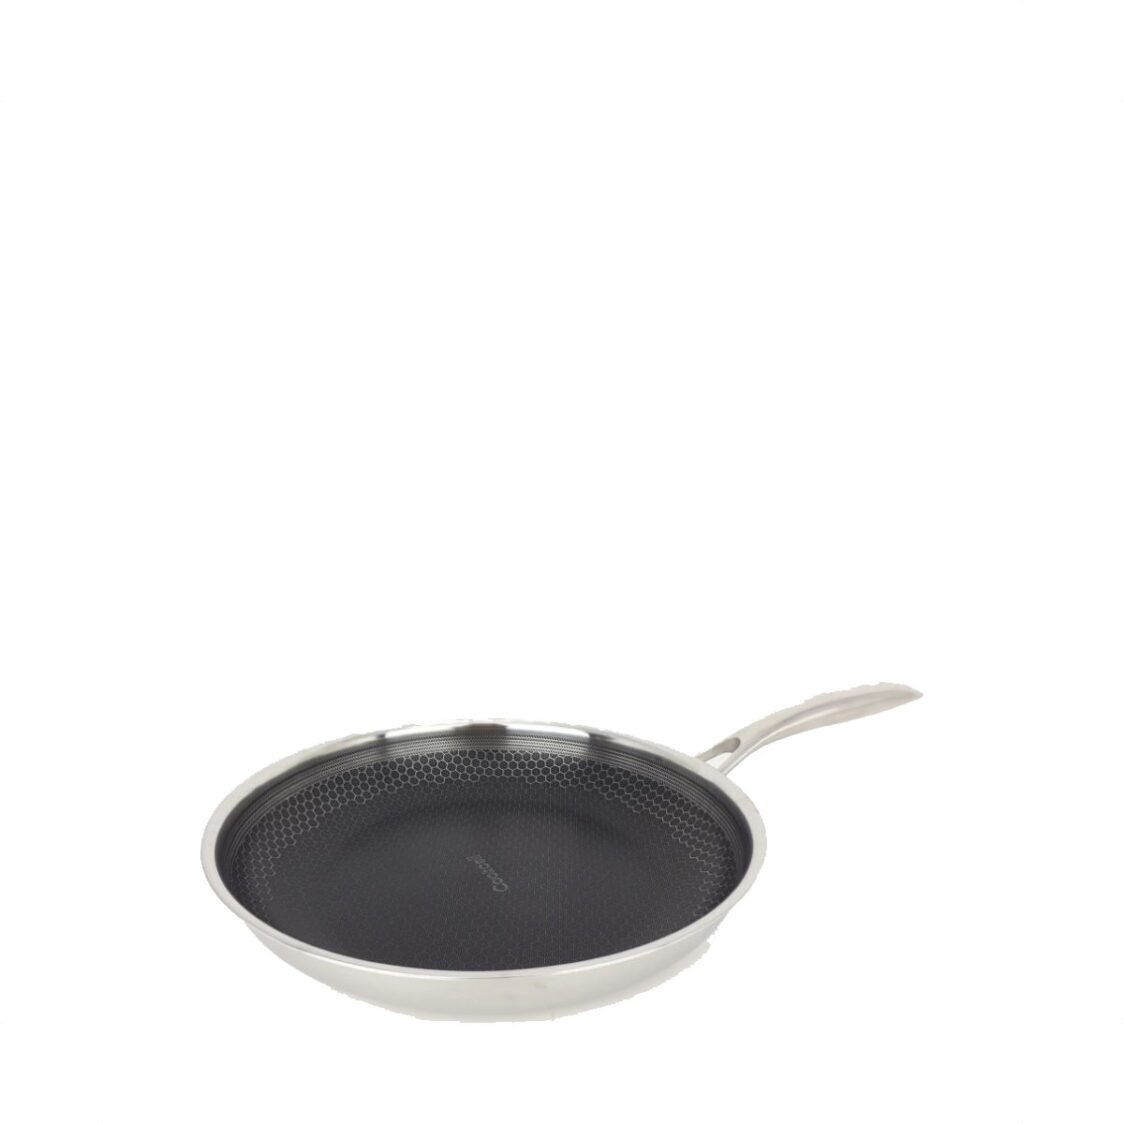 Cookcell Blackcube 24cm Frypan